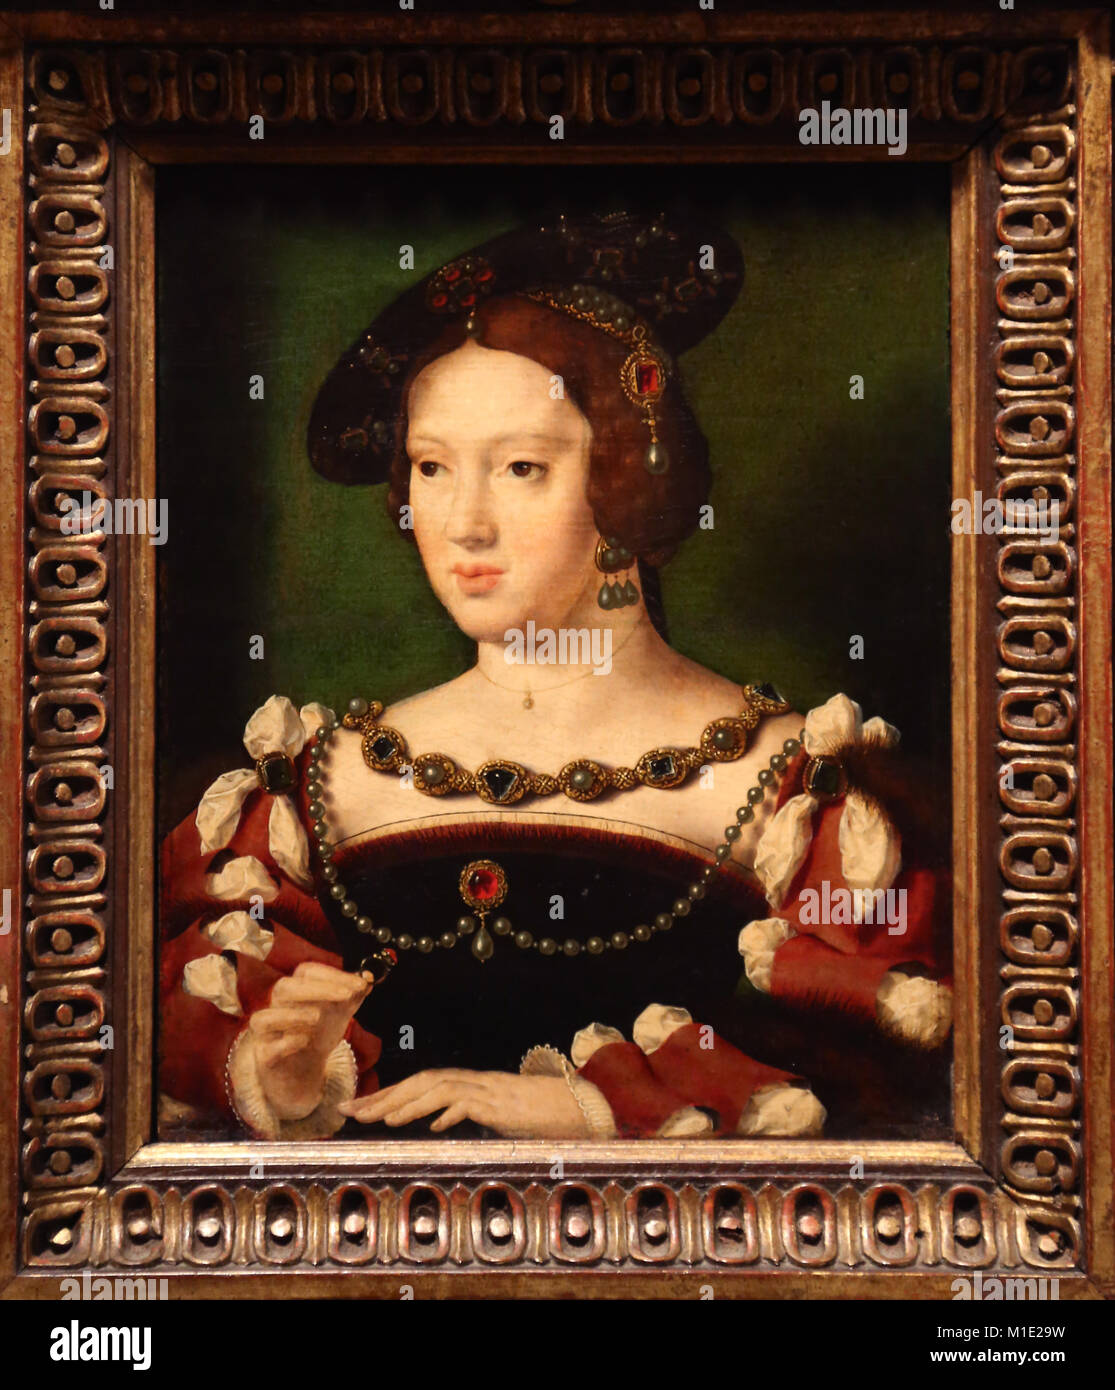 Portrait of Eleanor of Austria(1498-1558) Queen of France and Portugal. Painted by Joos van Cleeve in 1530 - 1540. Stock Photo